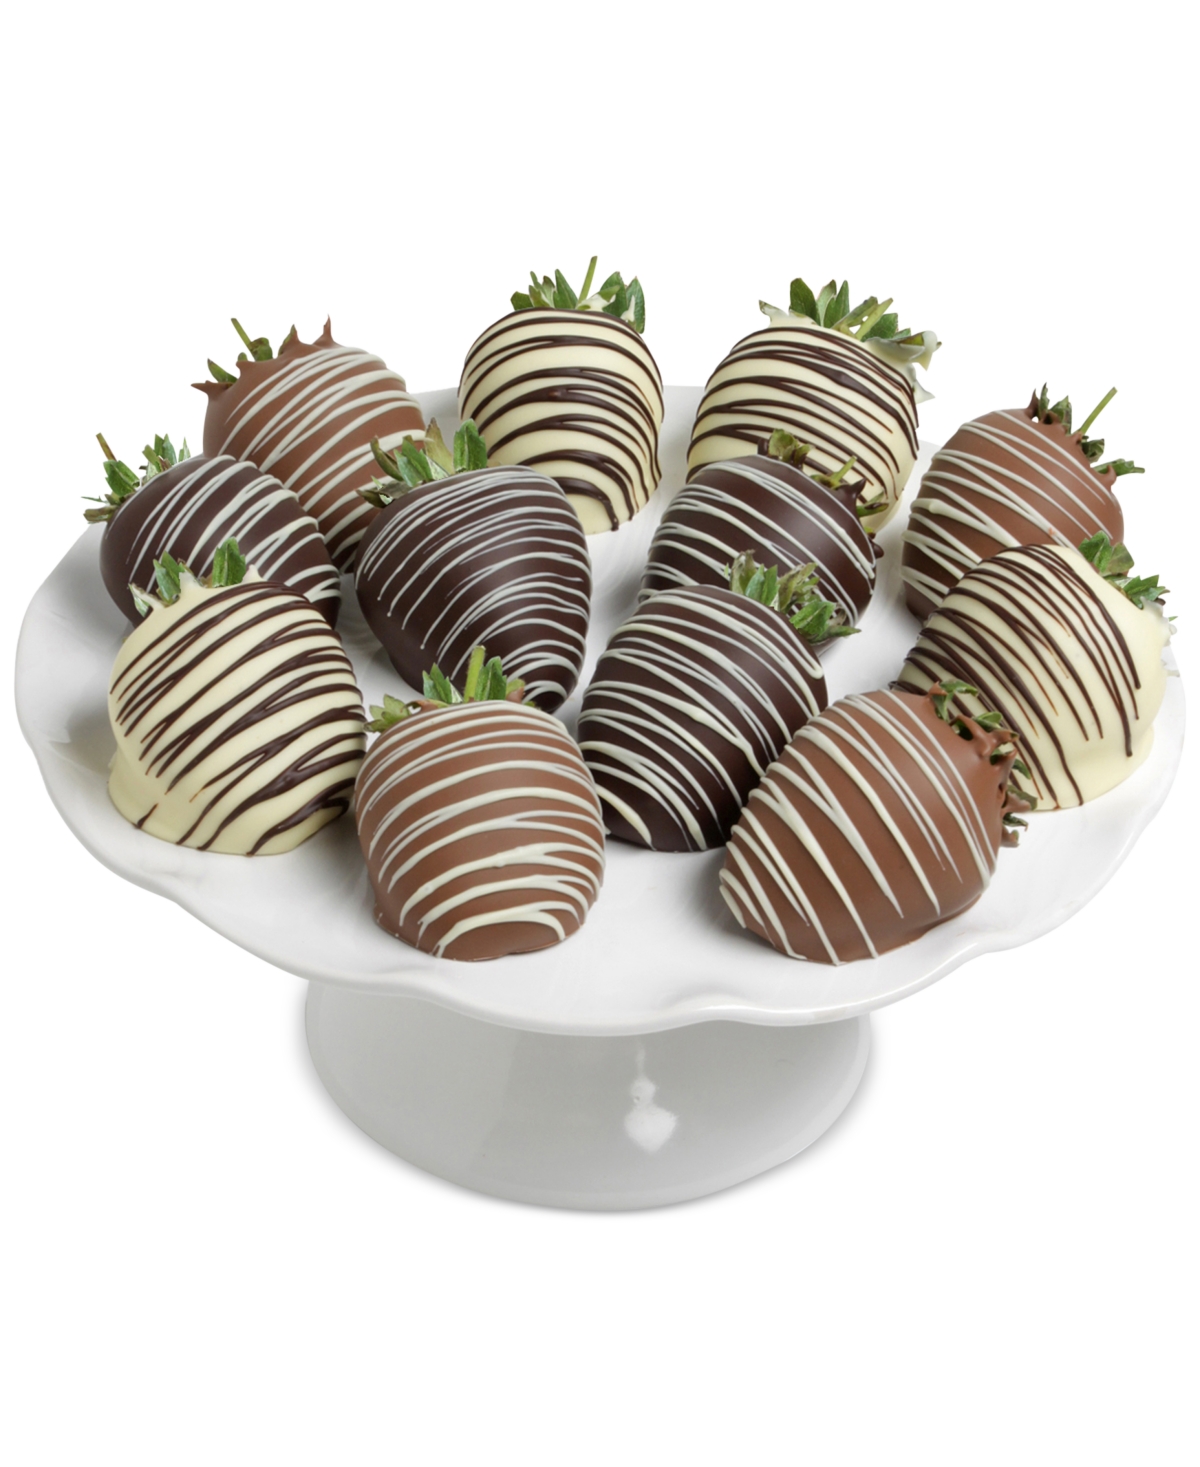 Chocolate Covered Company 12-pc. Classic Chocolate Covered Strawberries In Multi